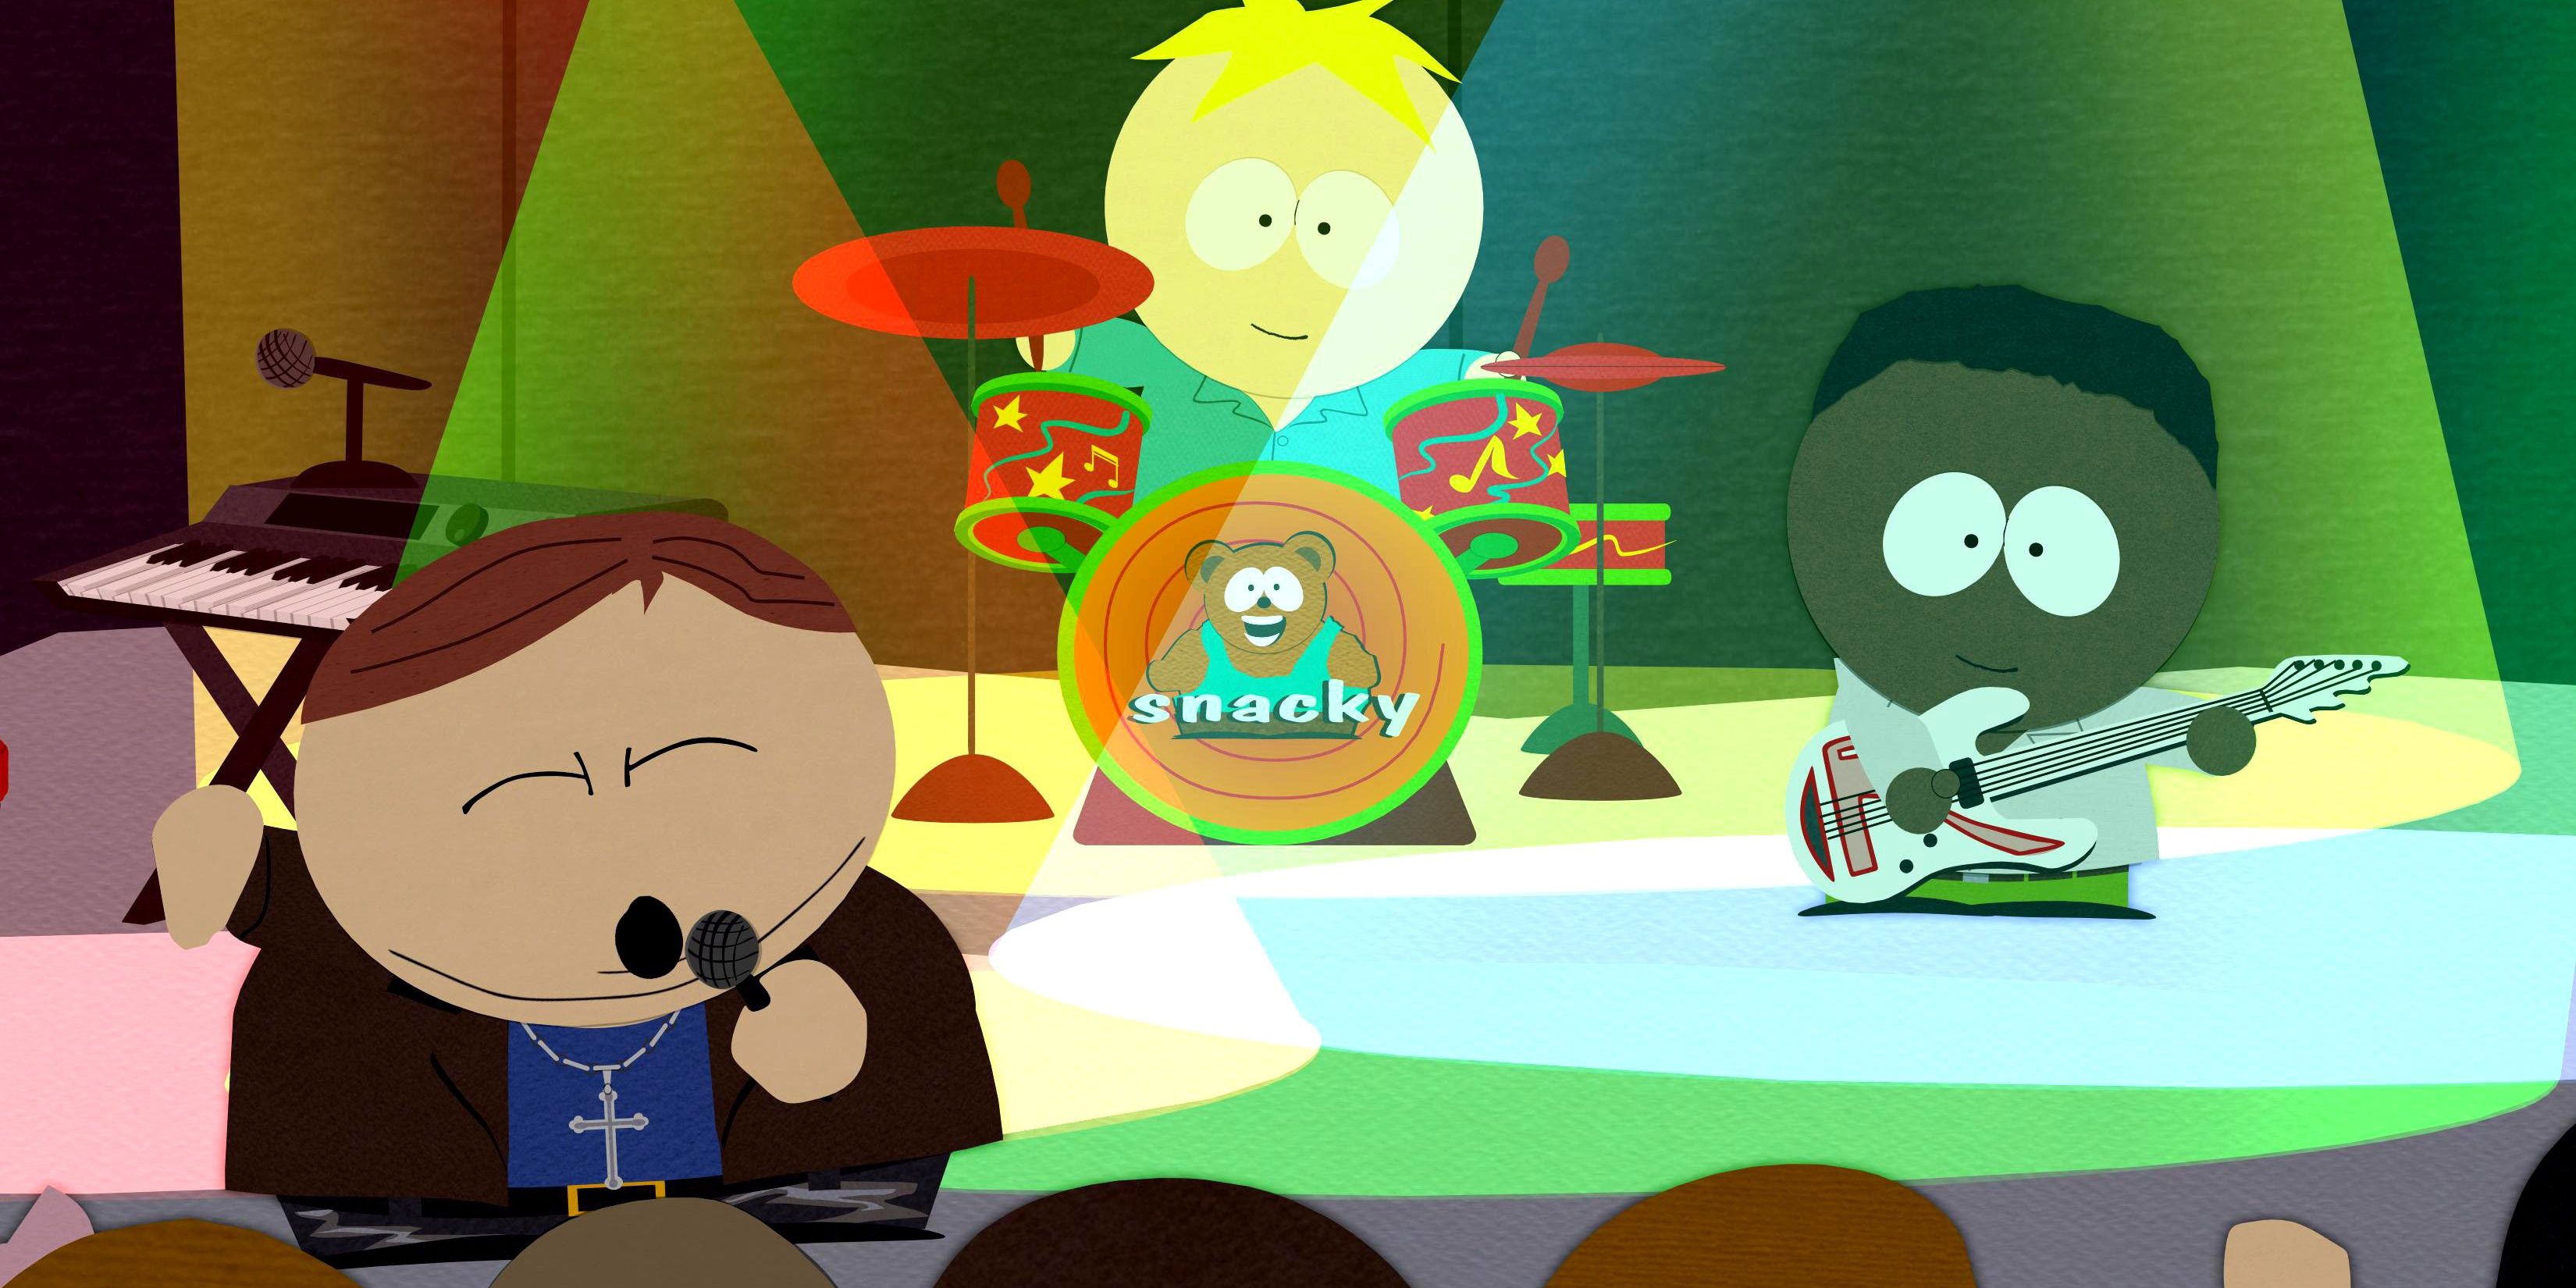 The 20 Best South Park Episodes, Ranked